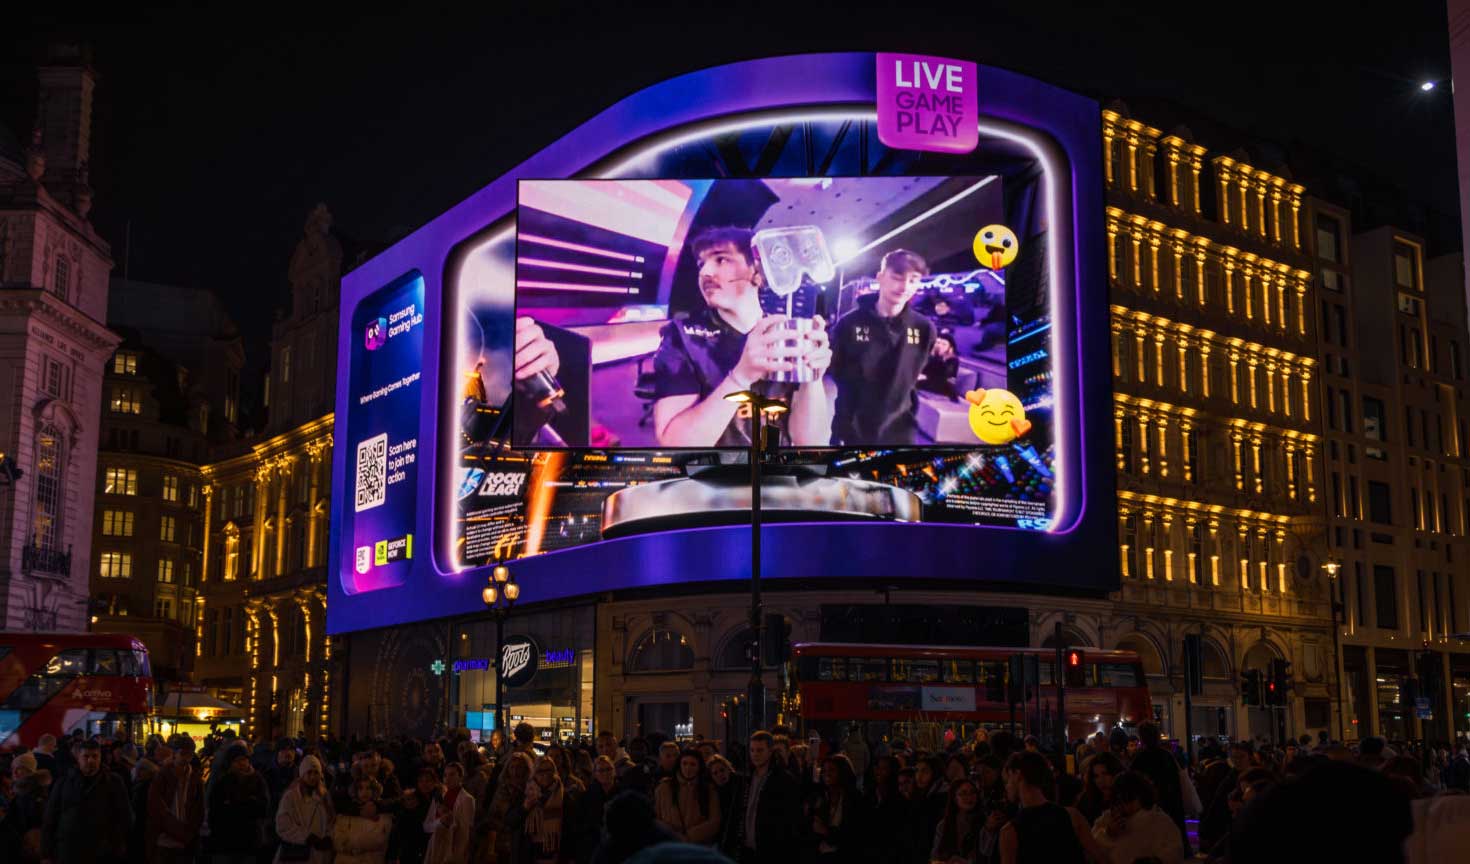 Samsung Gaming Hub has turned the Piccadilly Lights into an interactive 3D livestream 